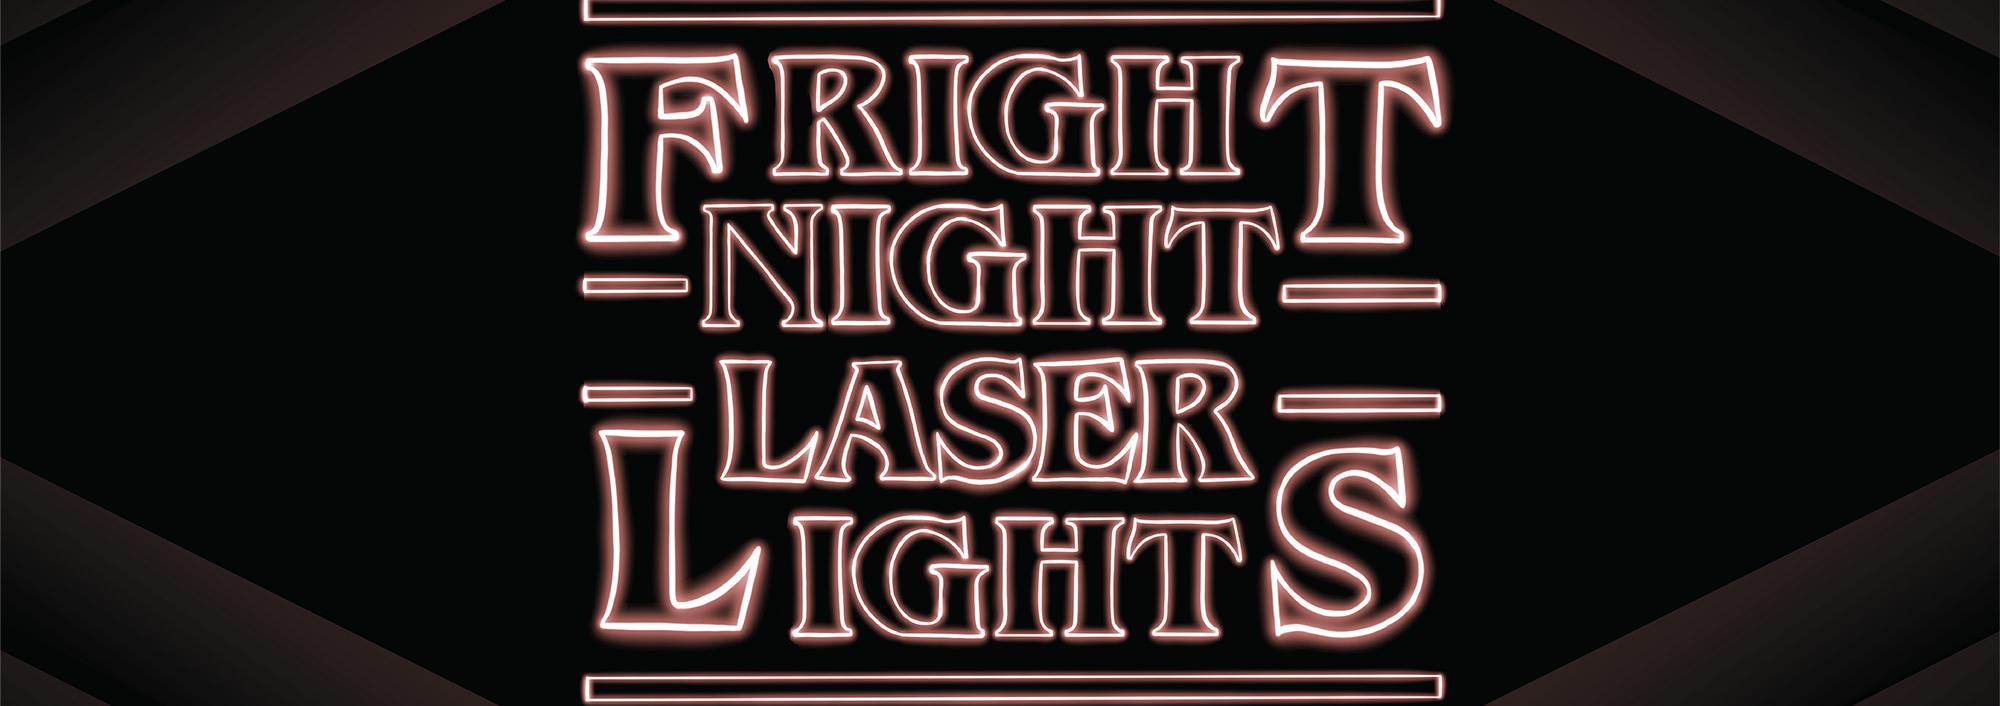 Logo with glowing red letters on a black background that read "Fright Night Laser Lights"